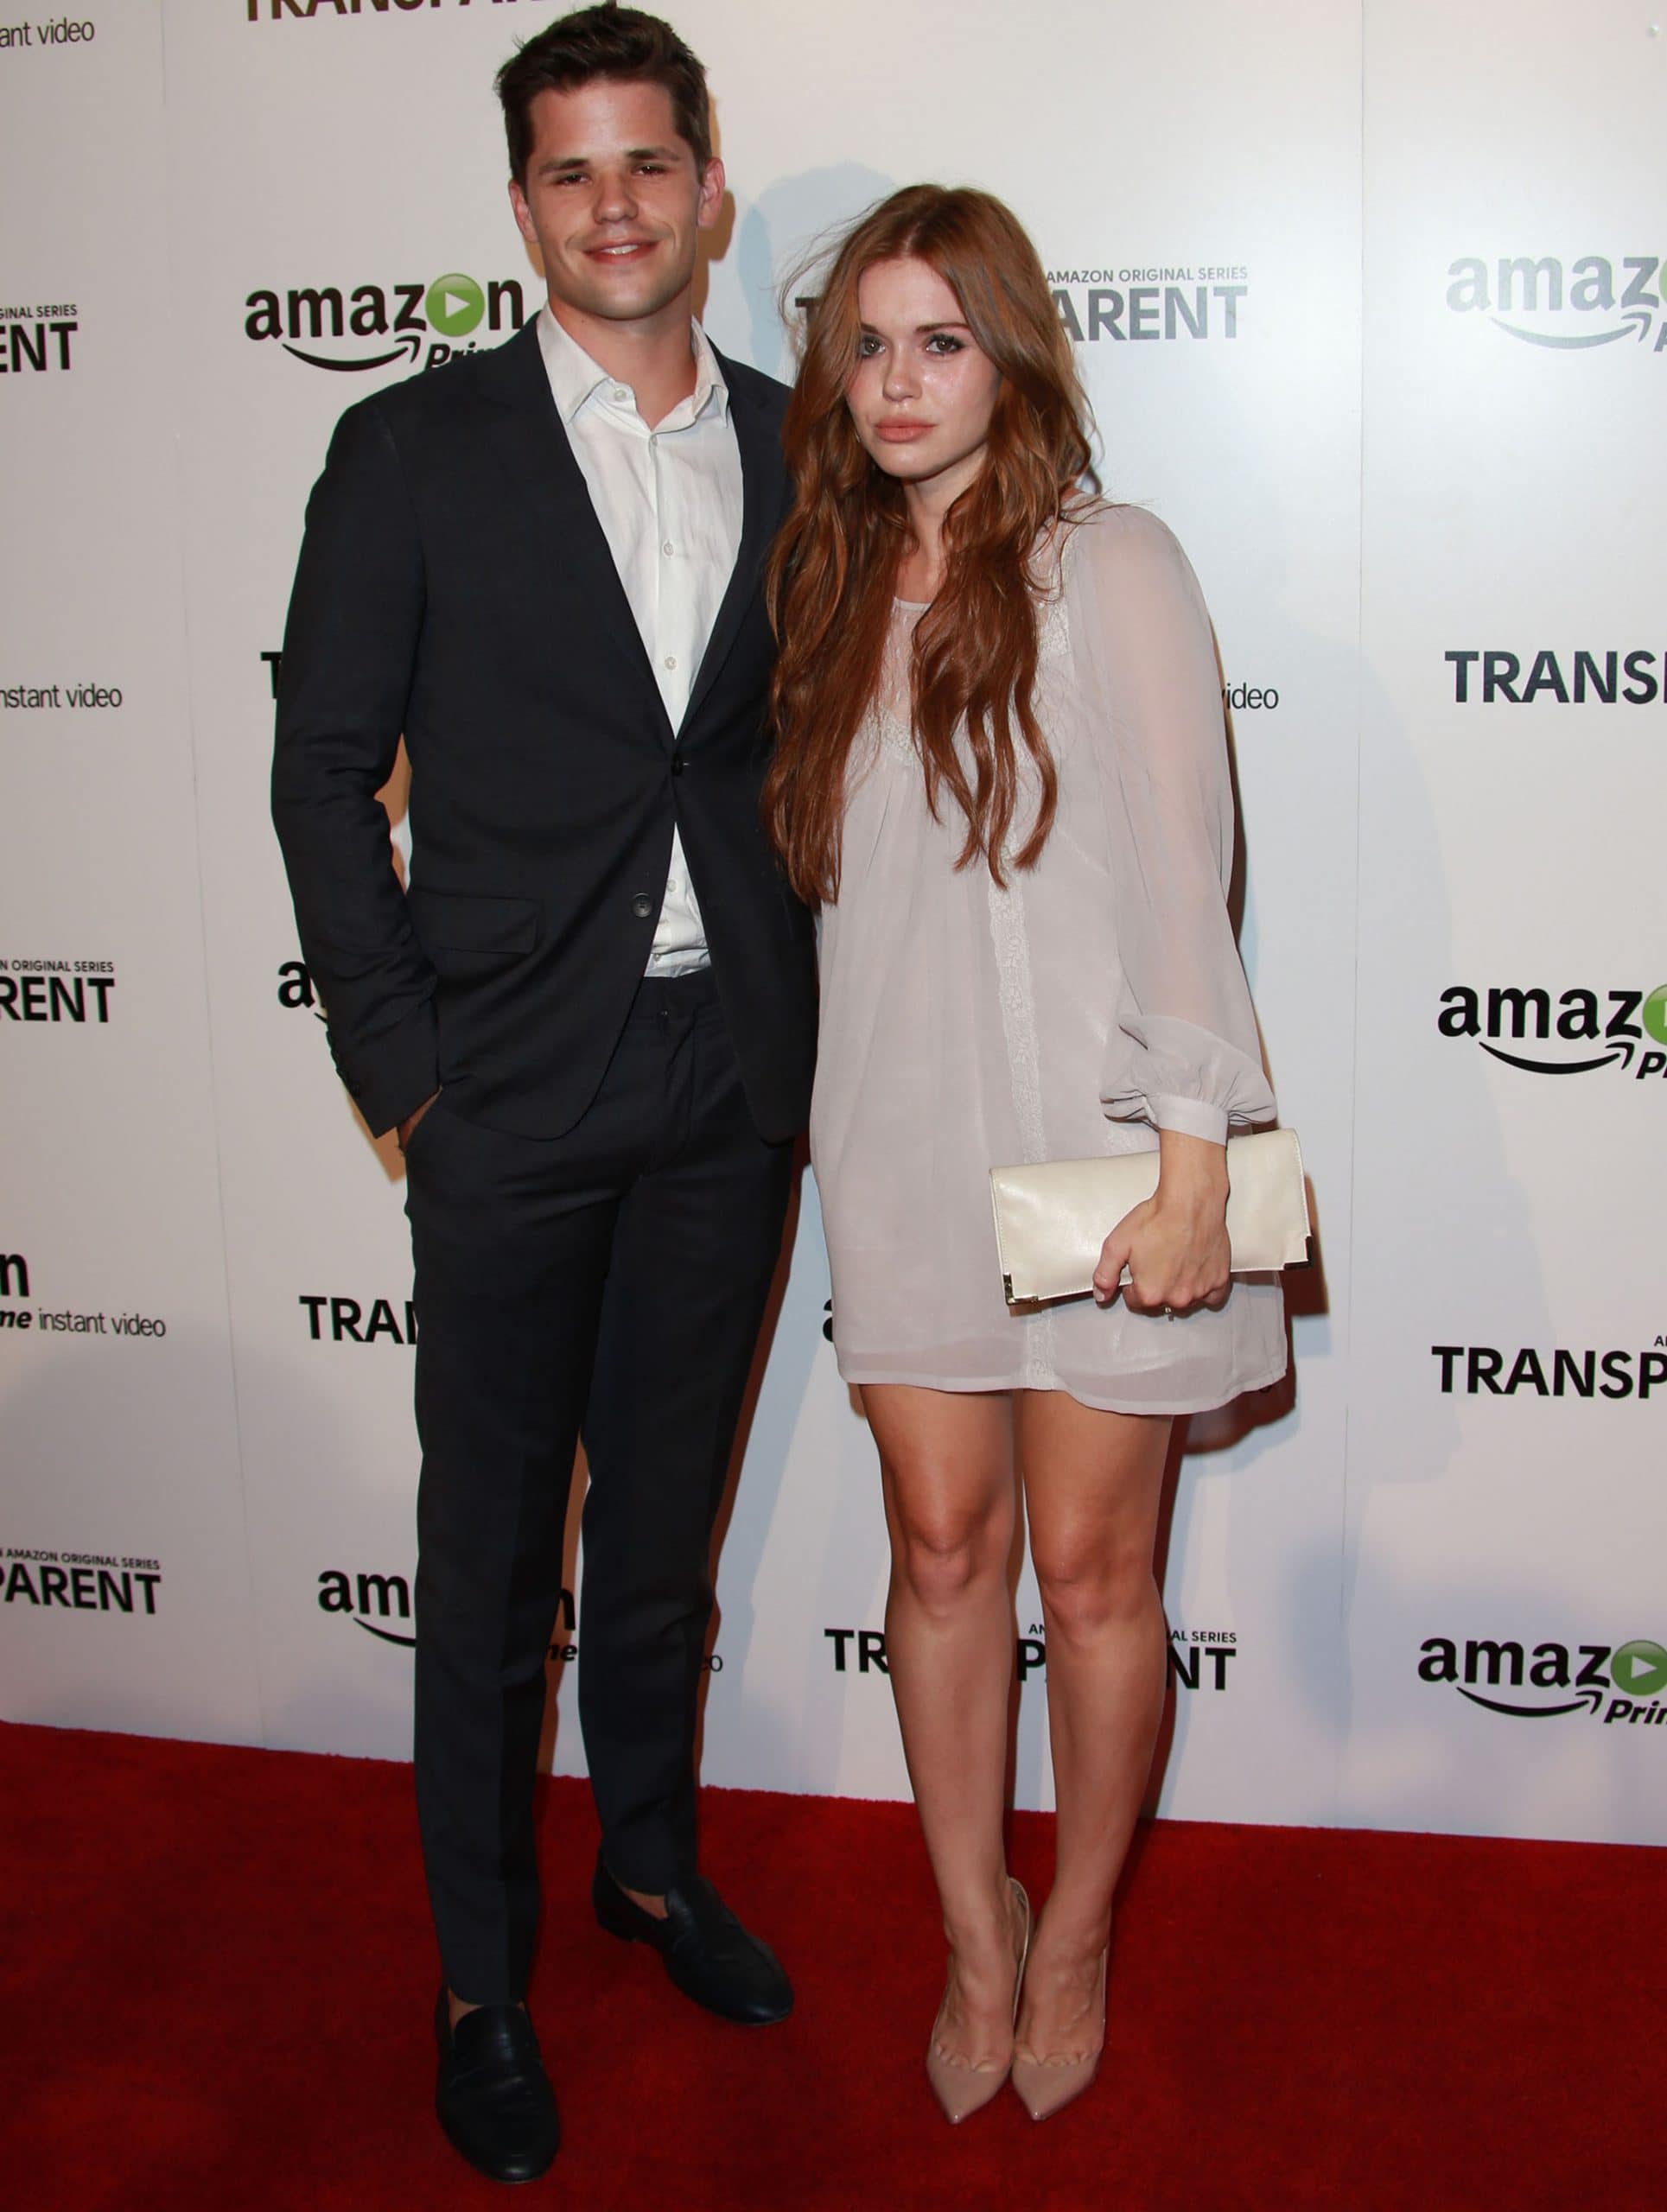 Max Carver and Holland Roden dated from 2014 to 2016